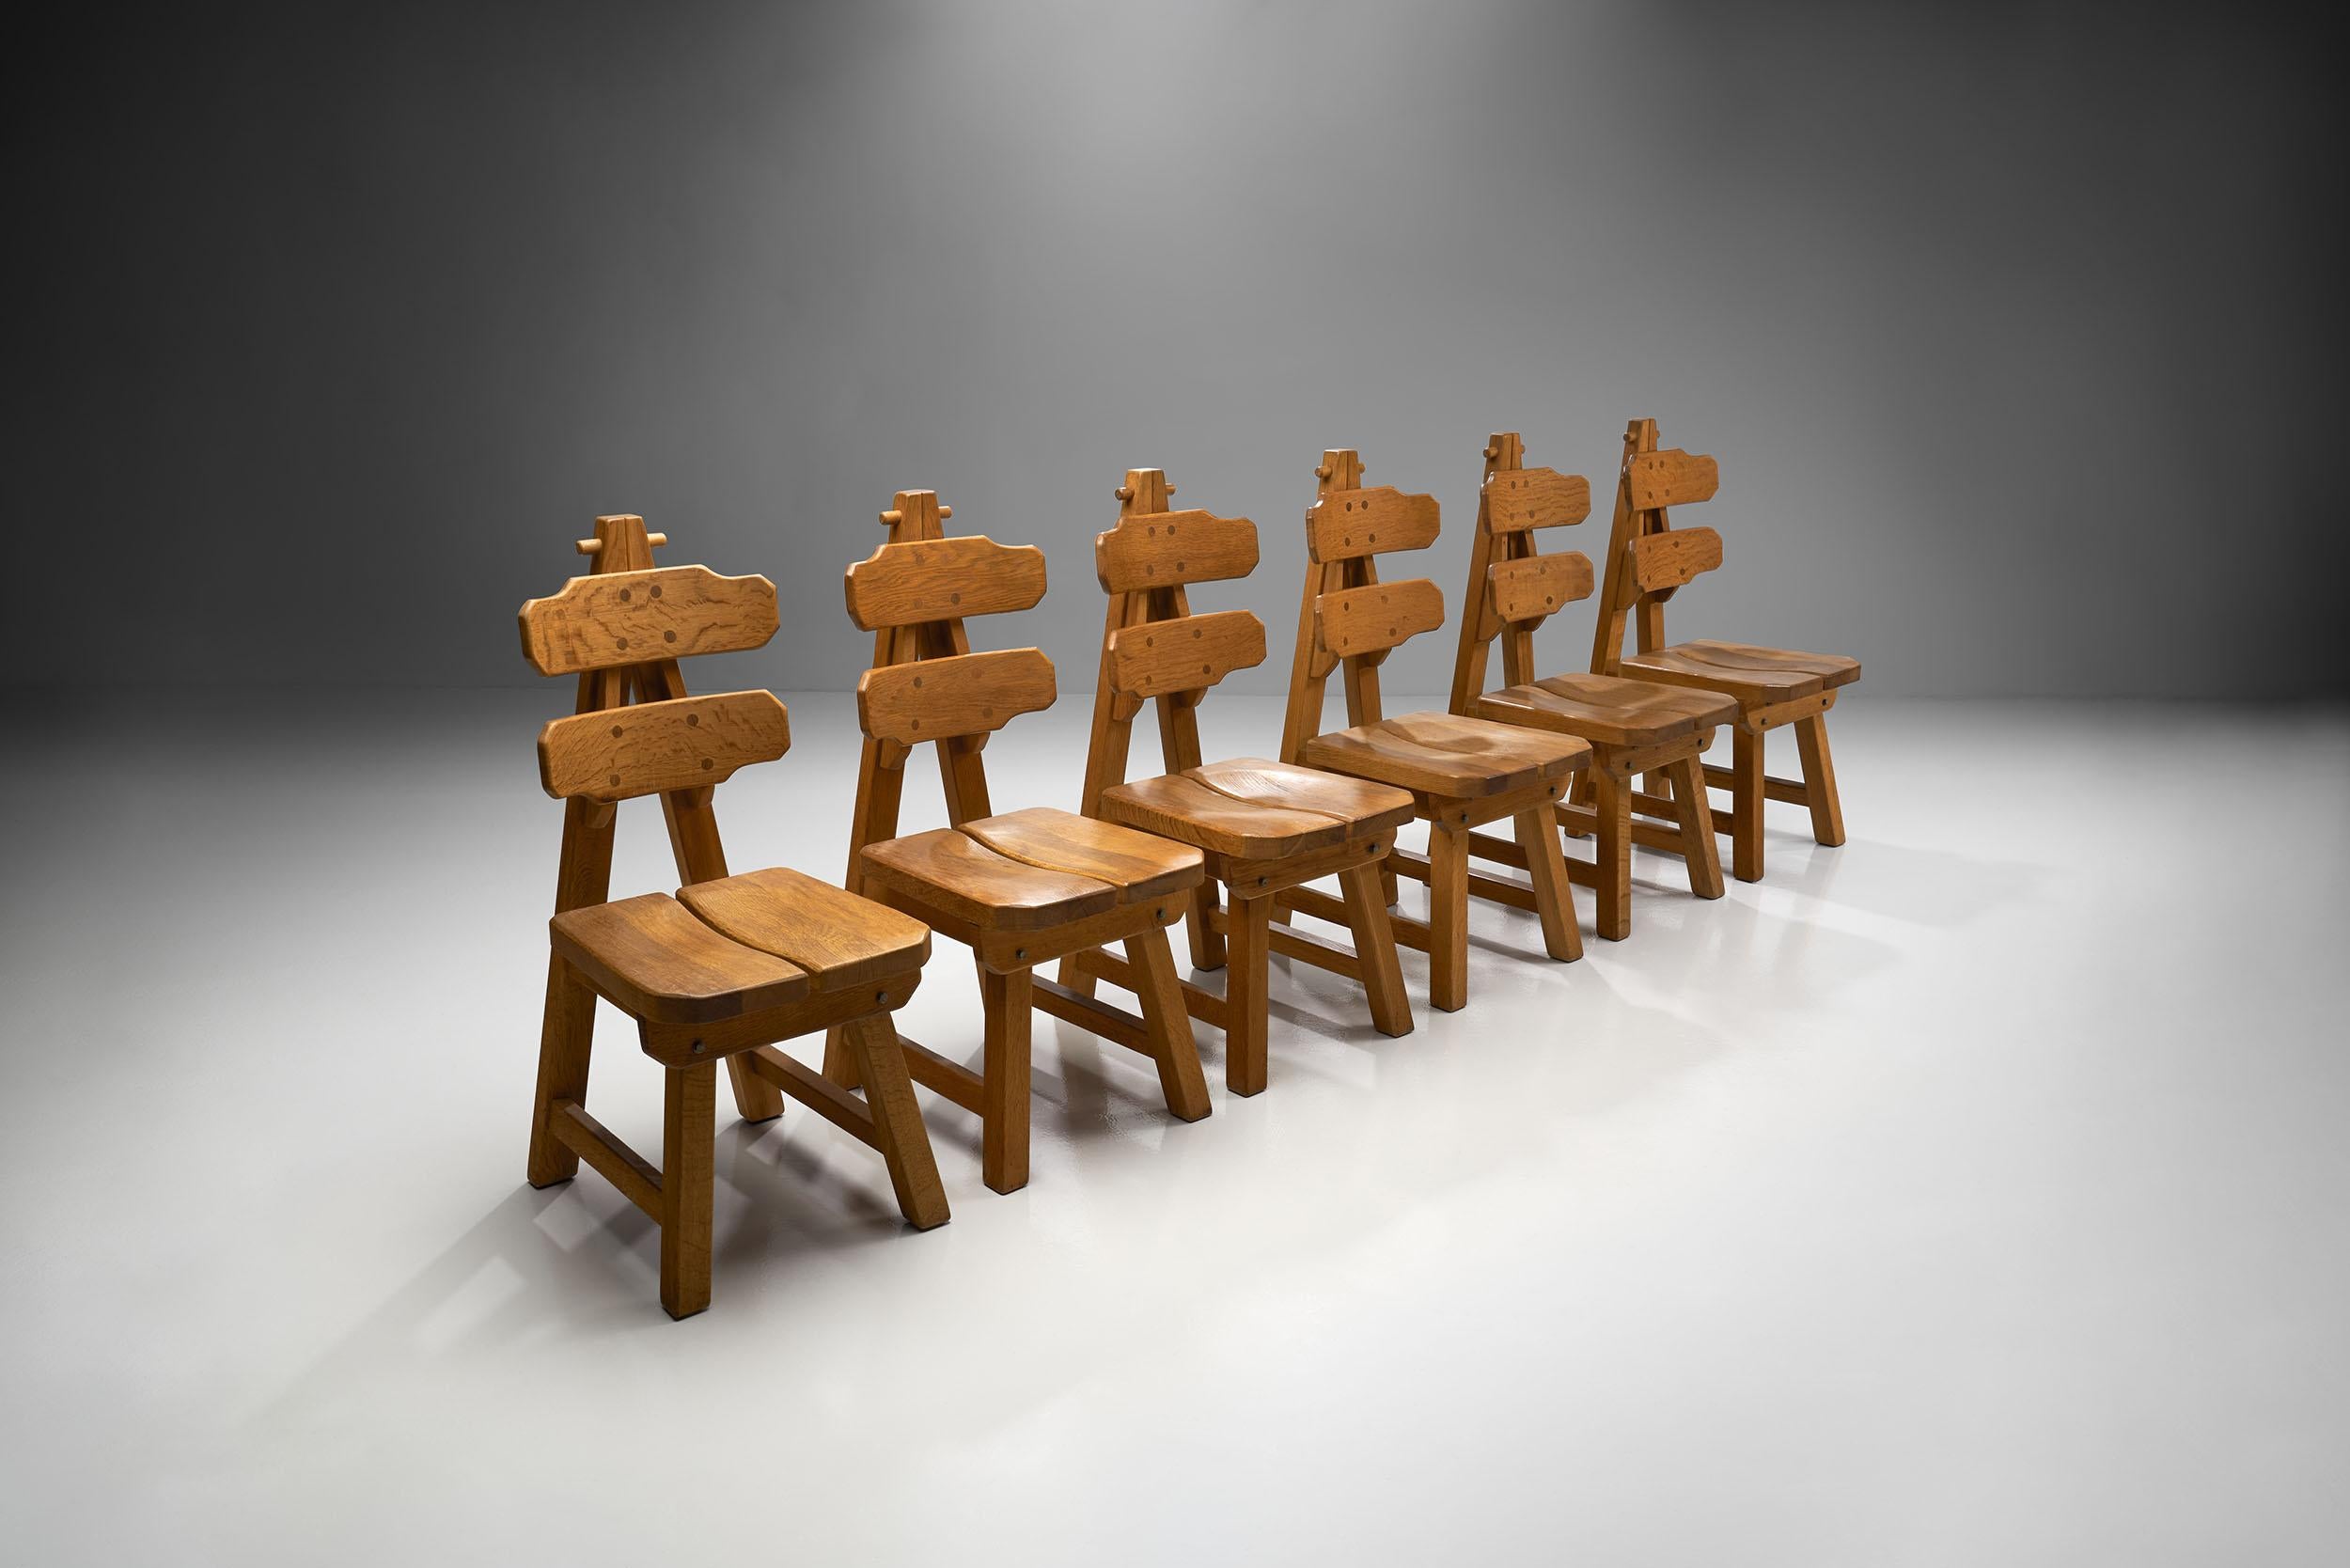 Impressive set of six oak brutalist chairs, Spain, circa 1970. This set features six exquisitely sculptural and geometrical brutalist chairs. The marks of Brutalism can be observed in the unornamented, solid wood, exposed joints, and raw oaken